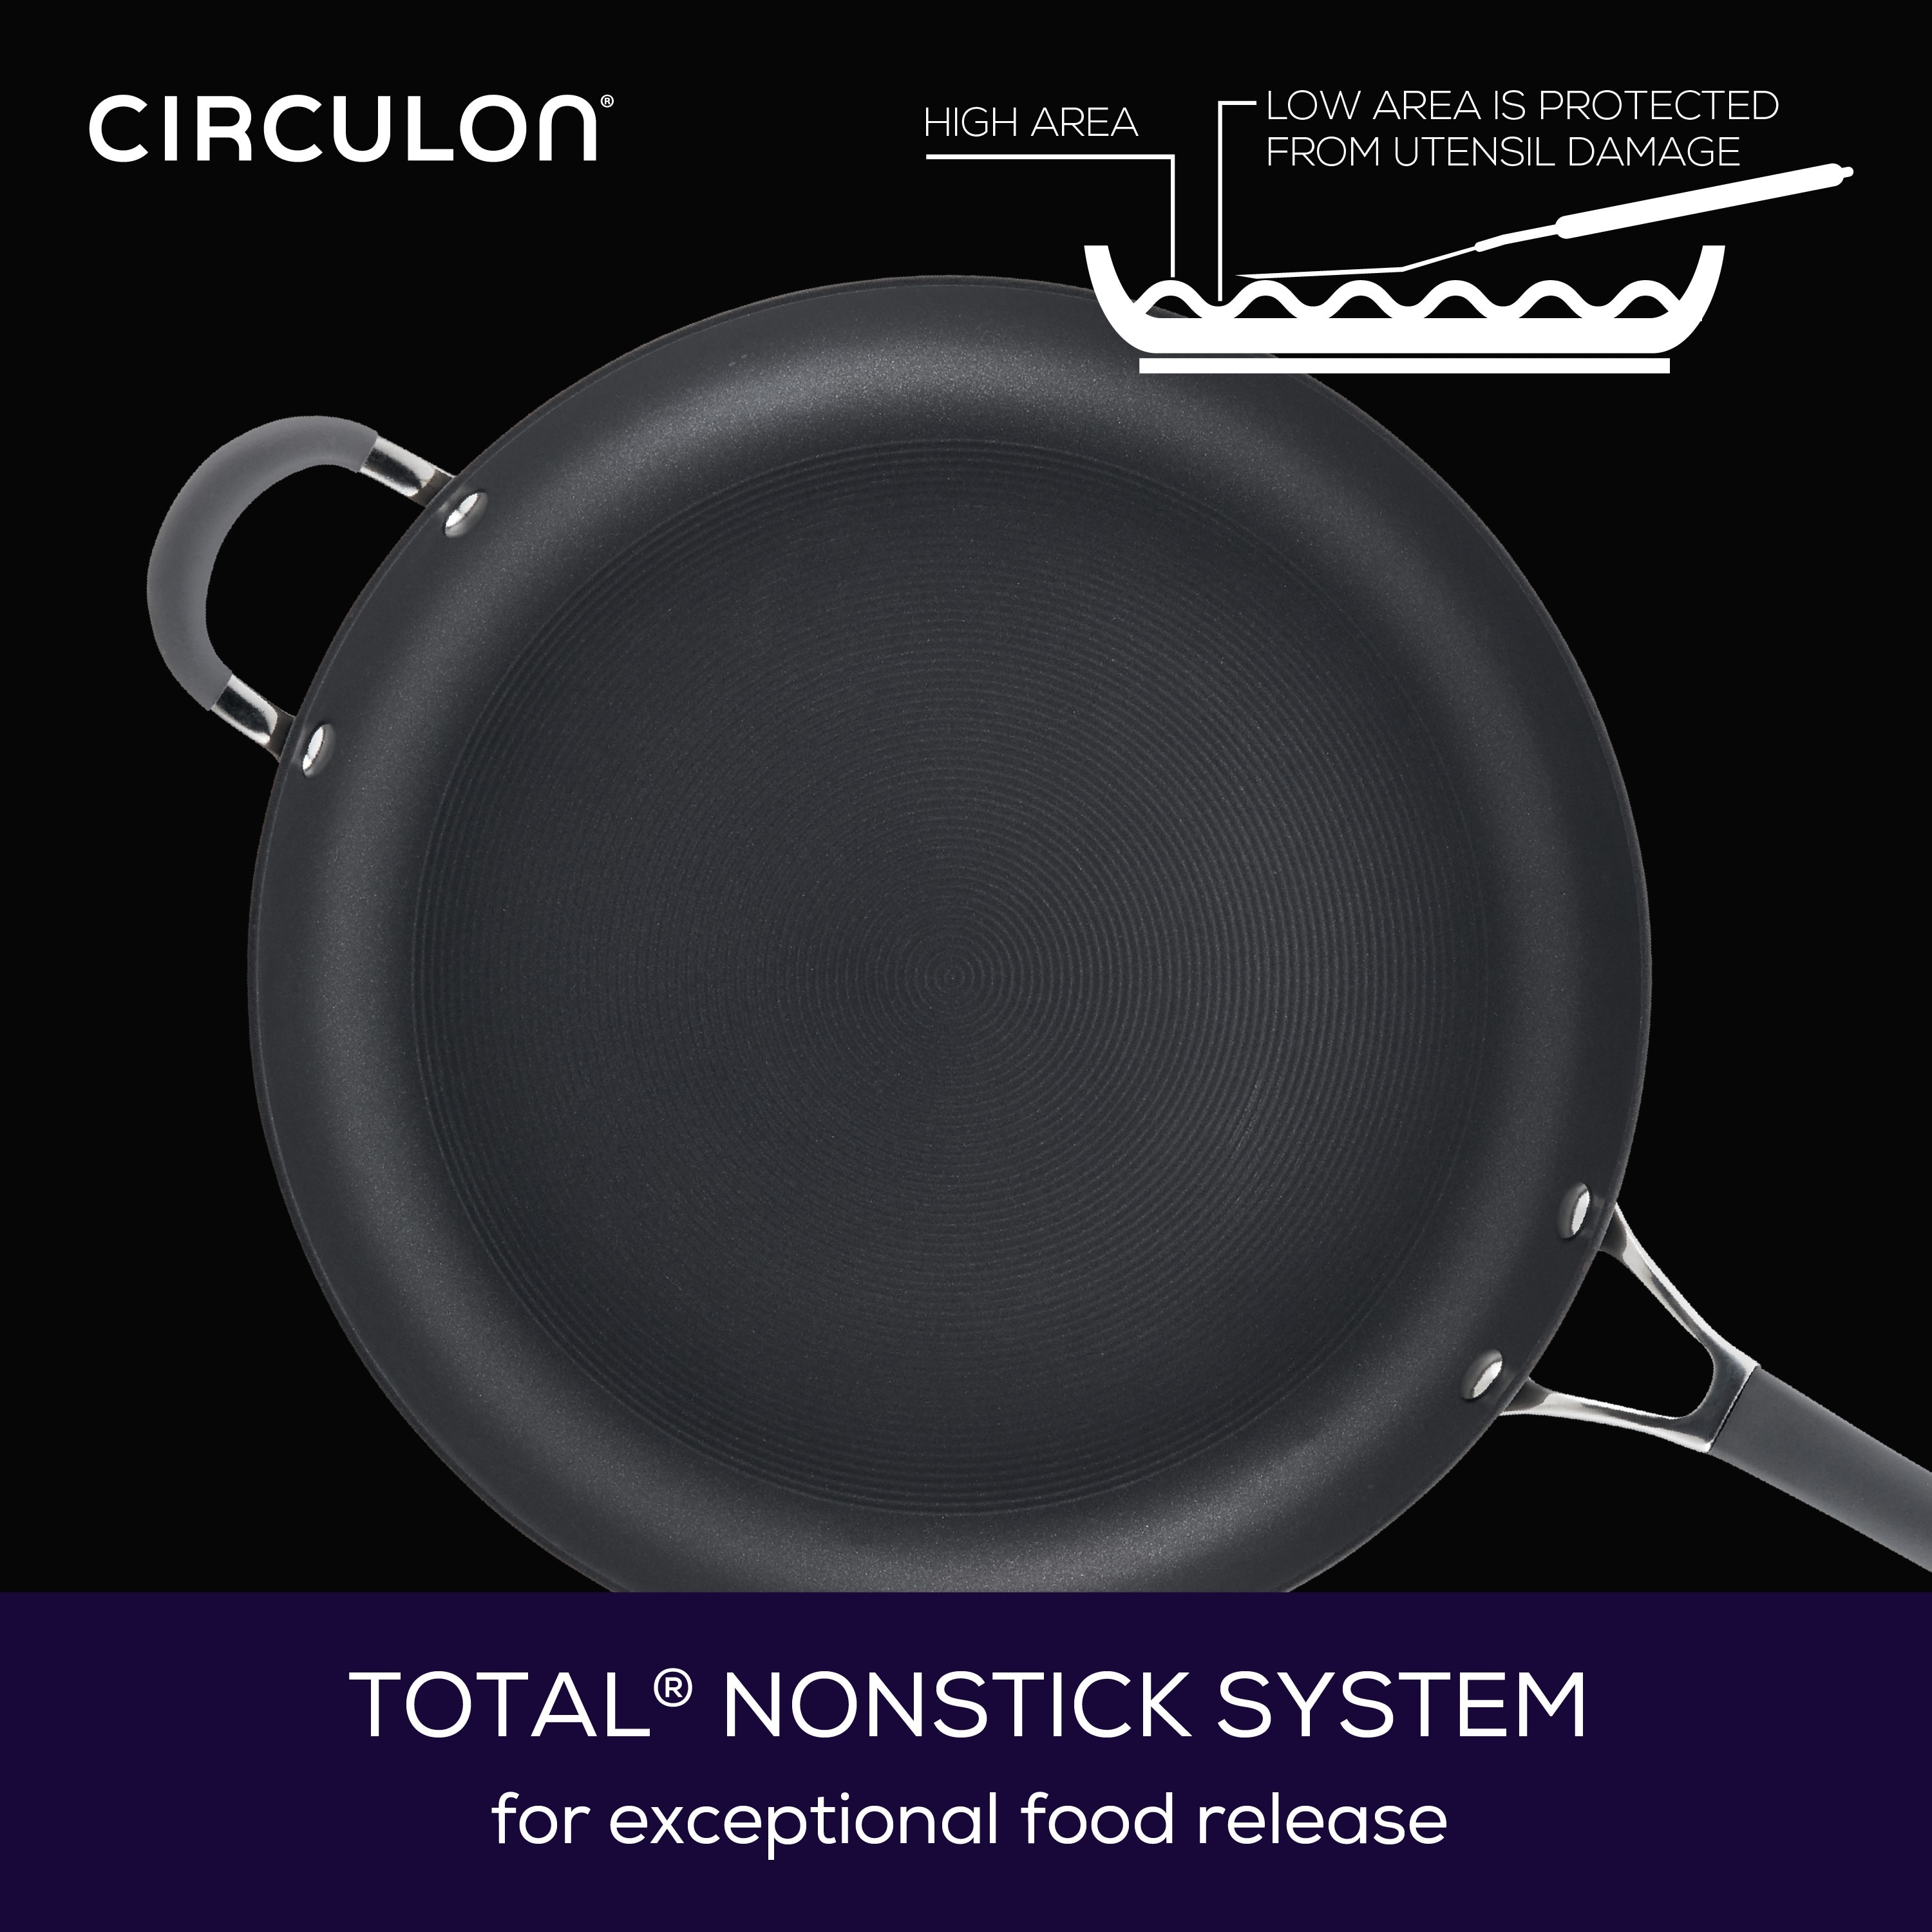 https://ak1.ostkcdn.com/images/products/is/images/direct/57fe5be9c50516afd1129e94d2aaef4777559820/Circulon-Radiance-Hard-Anodized-Nonstick-Frying-Pan-with-Helper-Handle%2C-14-Inch%2C-Gray.jpg